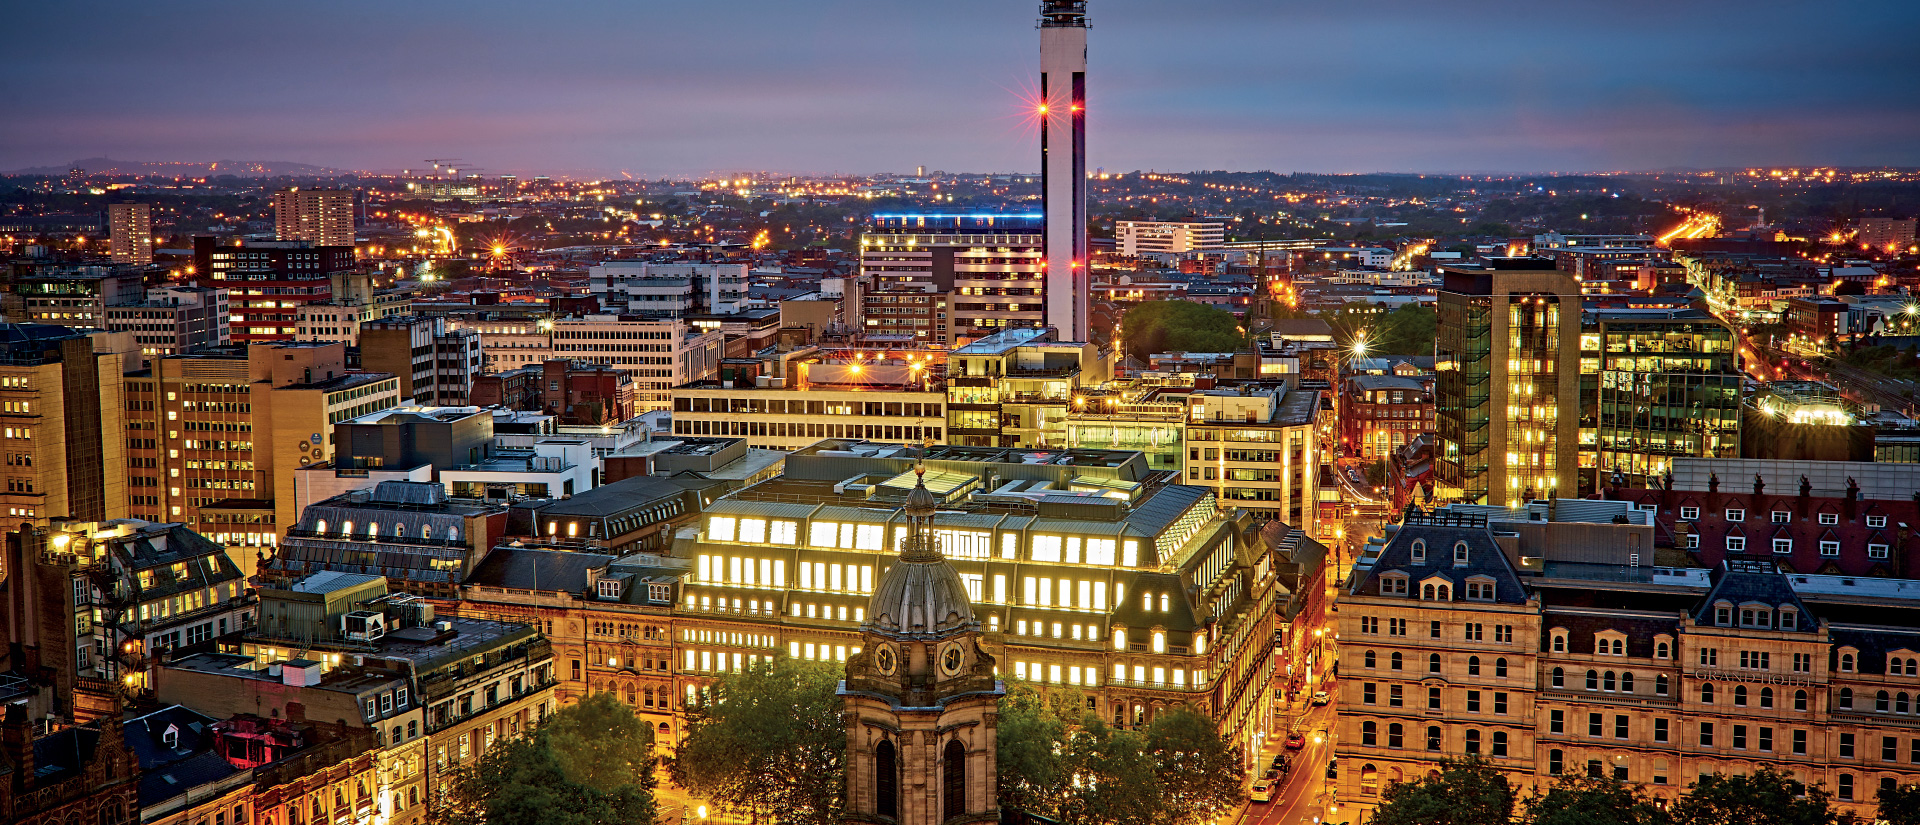 Night time image of 55 Colmore Row offices in Birmingham City Centre